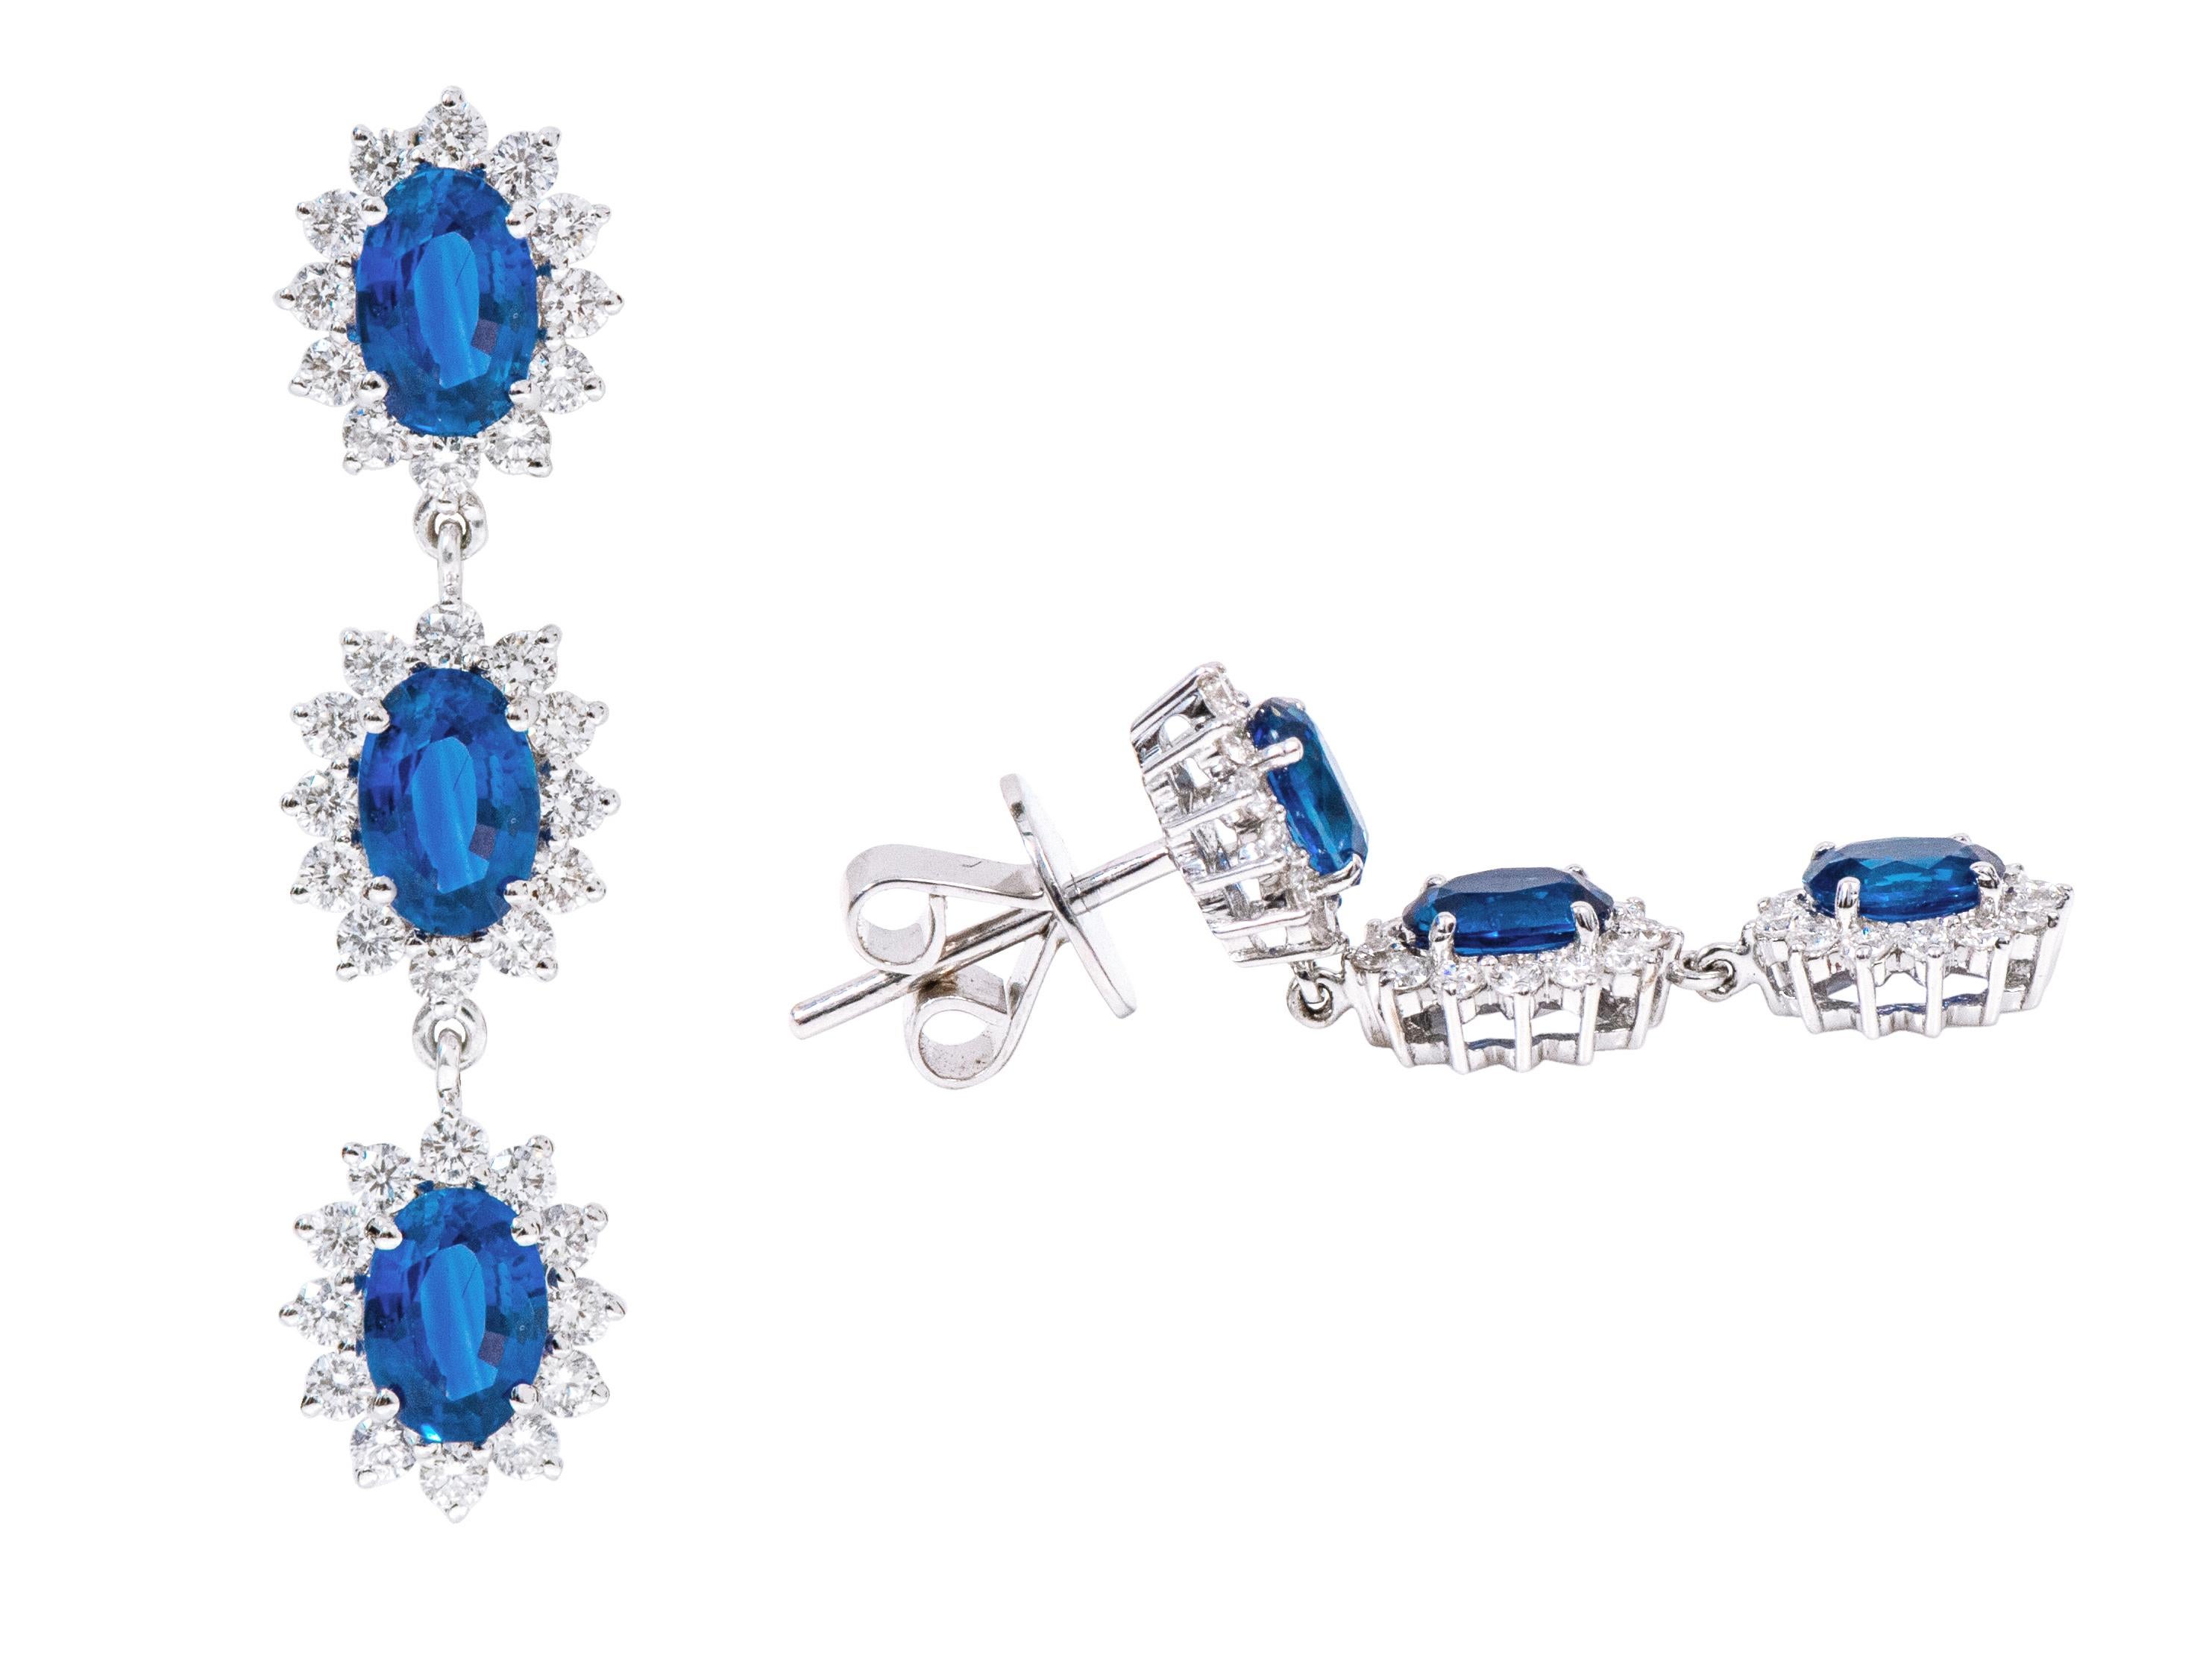 18 Karat 4.13 Carat Sapphire and Diamond Cluster Drop Earrings

This exemplary azure blue sapphire and diamond long earring is regal. The fantastic three rows of solitaire oval sapphires are surrounded by the outward facing open cluster of 3-prong